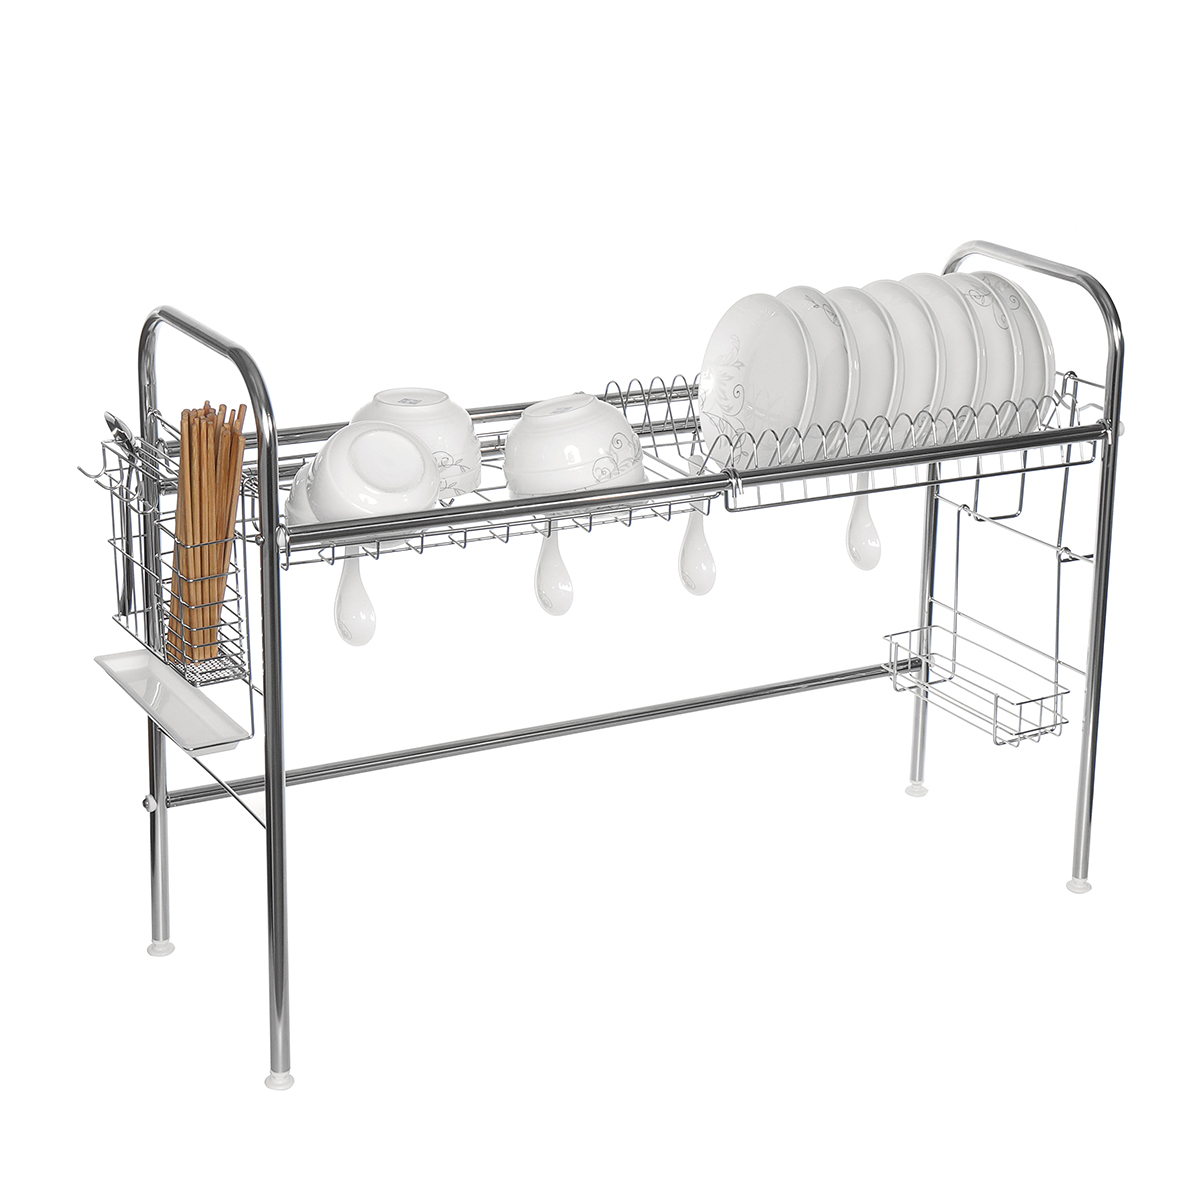 

Stainless Steel 2-Tier Dish Drying Rack Cup Drainer Strainer Holder Tray Kitchen Storage Rack